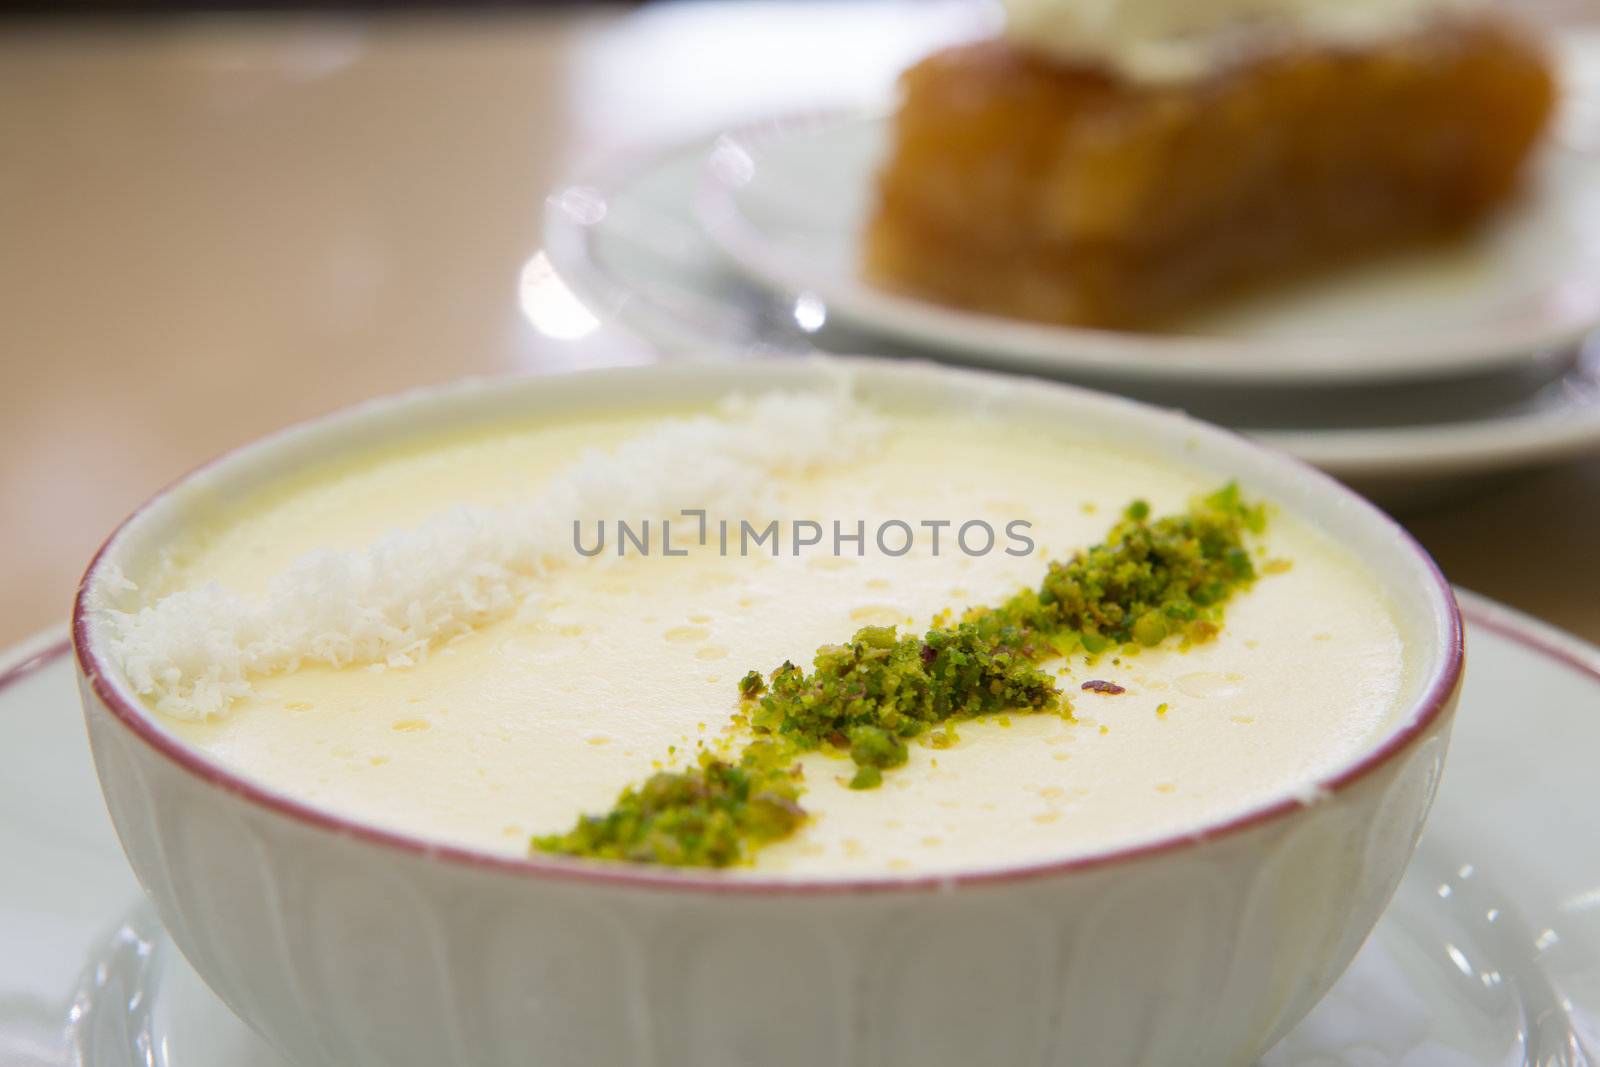 Traditional Turkish dessert Sutlac made with milk, rice and flour, served with pistachio and coconut crumbles.